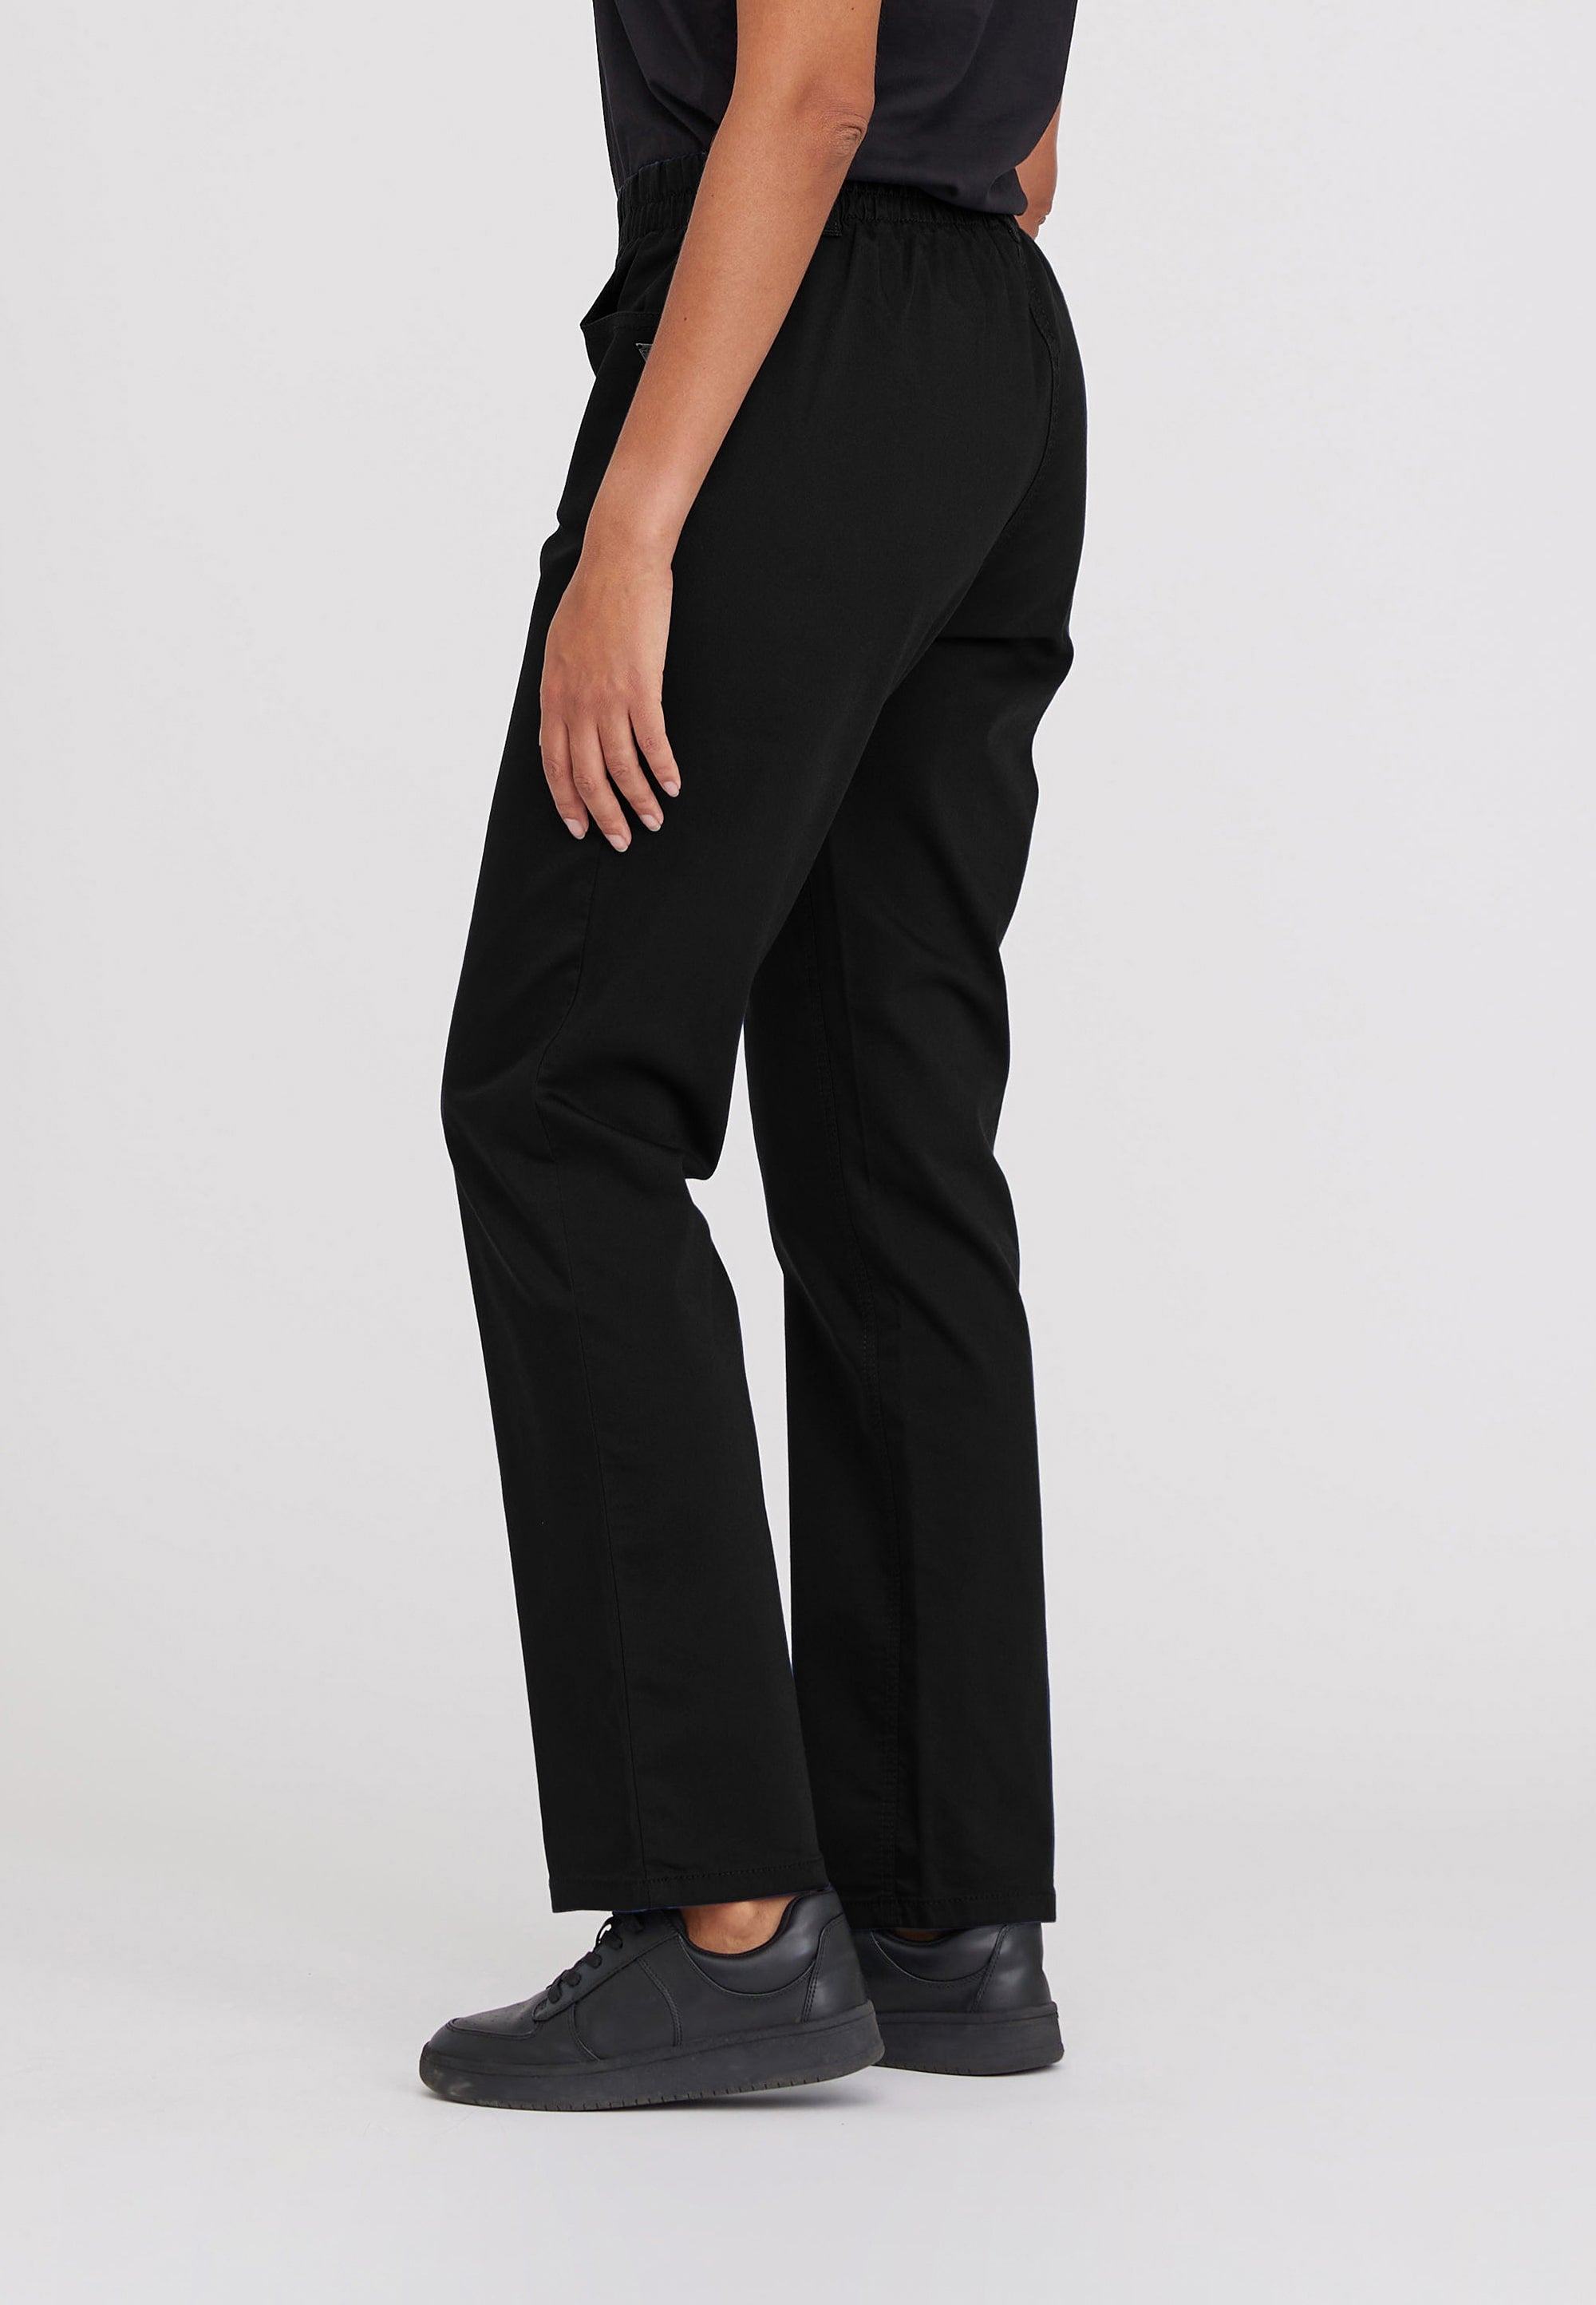 LAURIE Violet Relaxed - Medium Length Trousers RELAXED 99000 Black